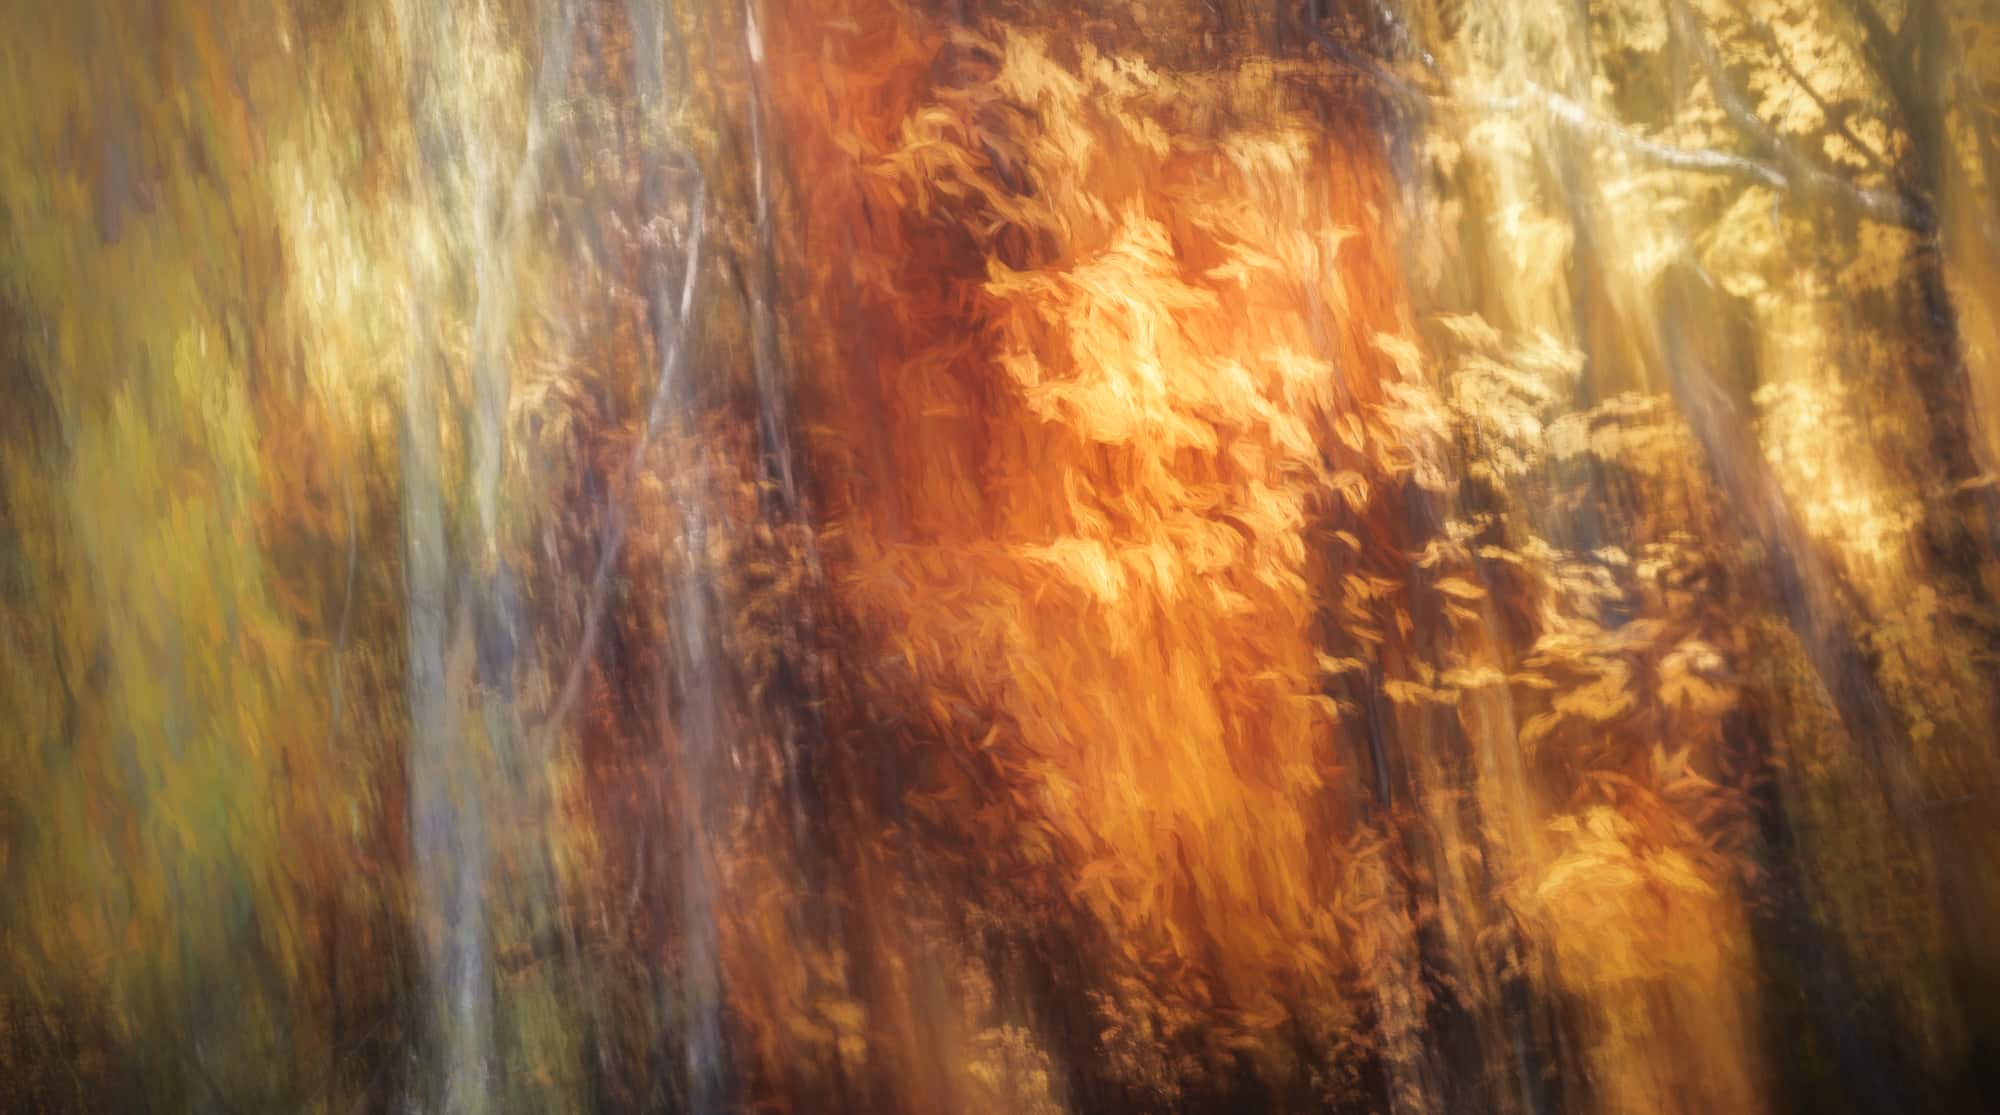 Abstract, impressionistic portrayal of autumn leaves in Queenstown, New Zealand, with a soft focus and a blend of warm and cool tones.